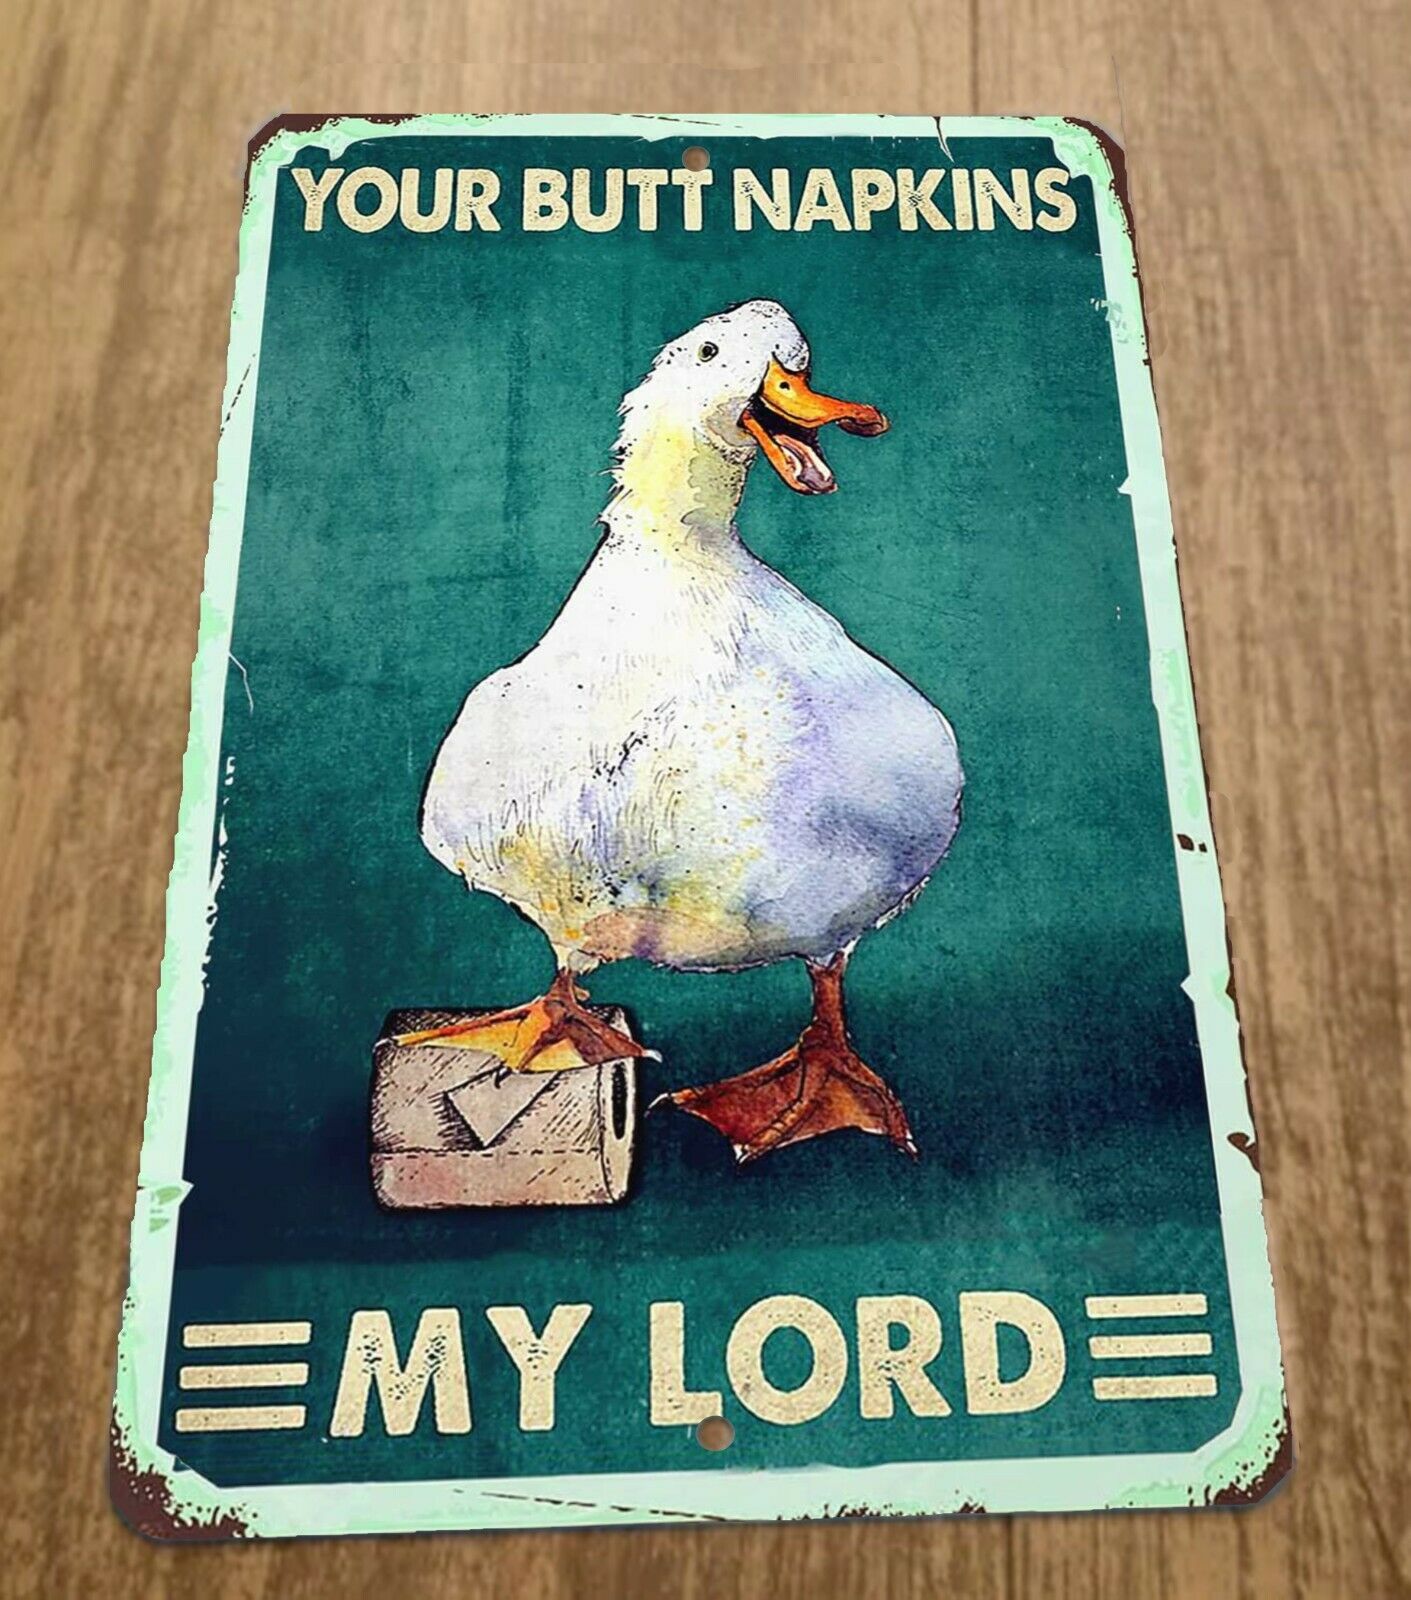 Funny Duck Your Butt Napkins My Lord 8x12 Metal Wall Sign Animals Birds Bathroom